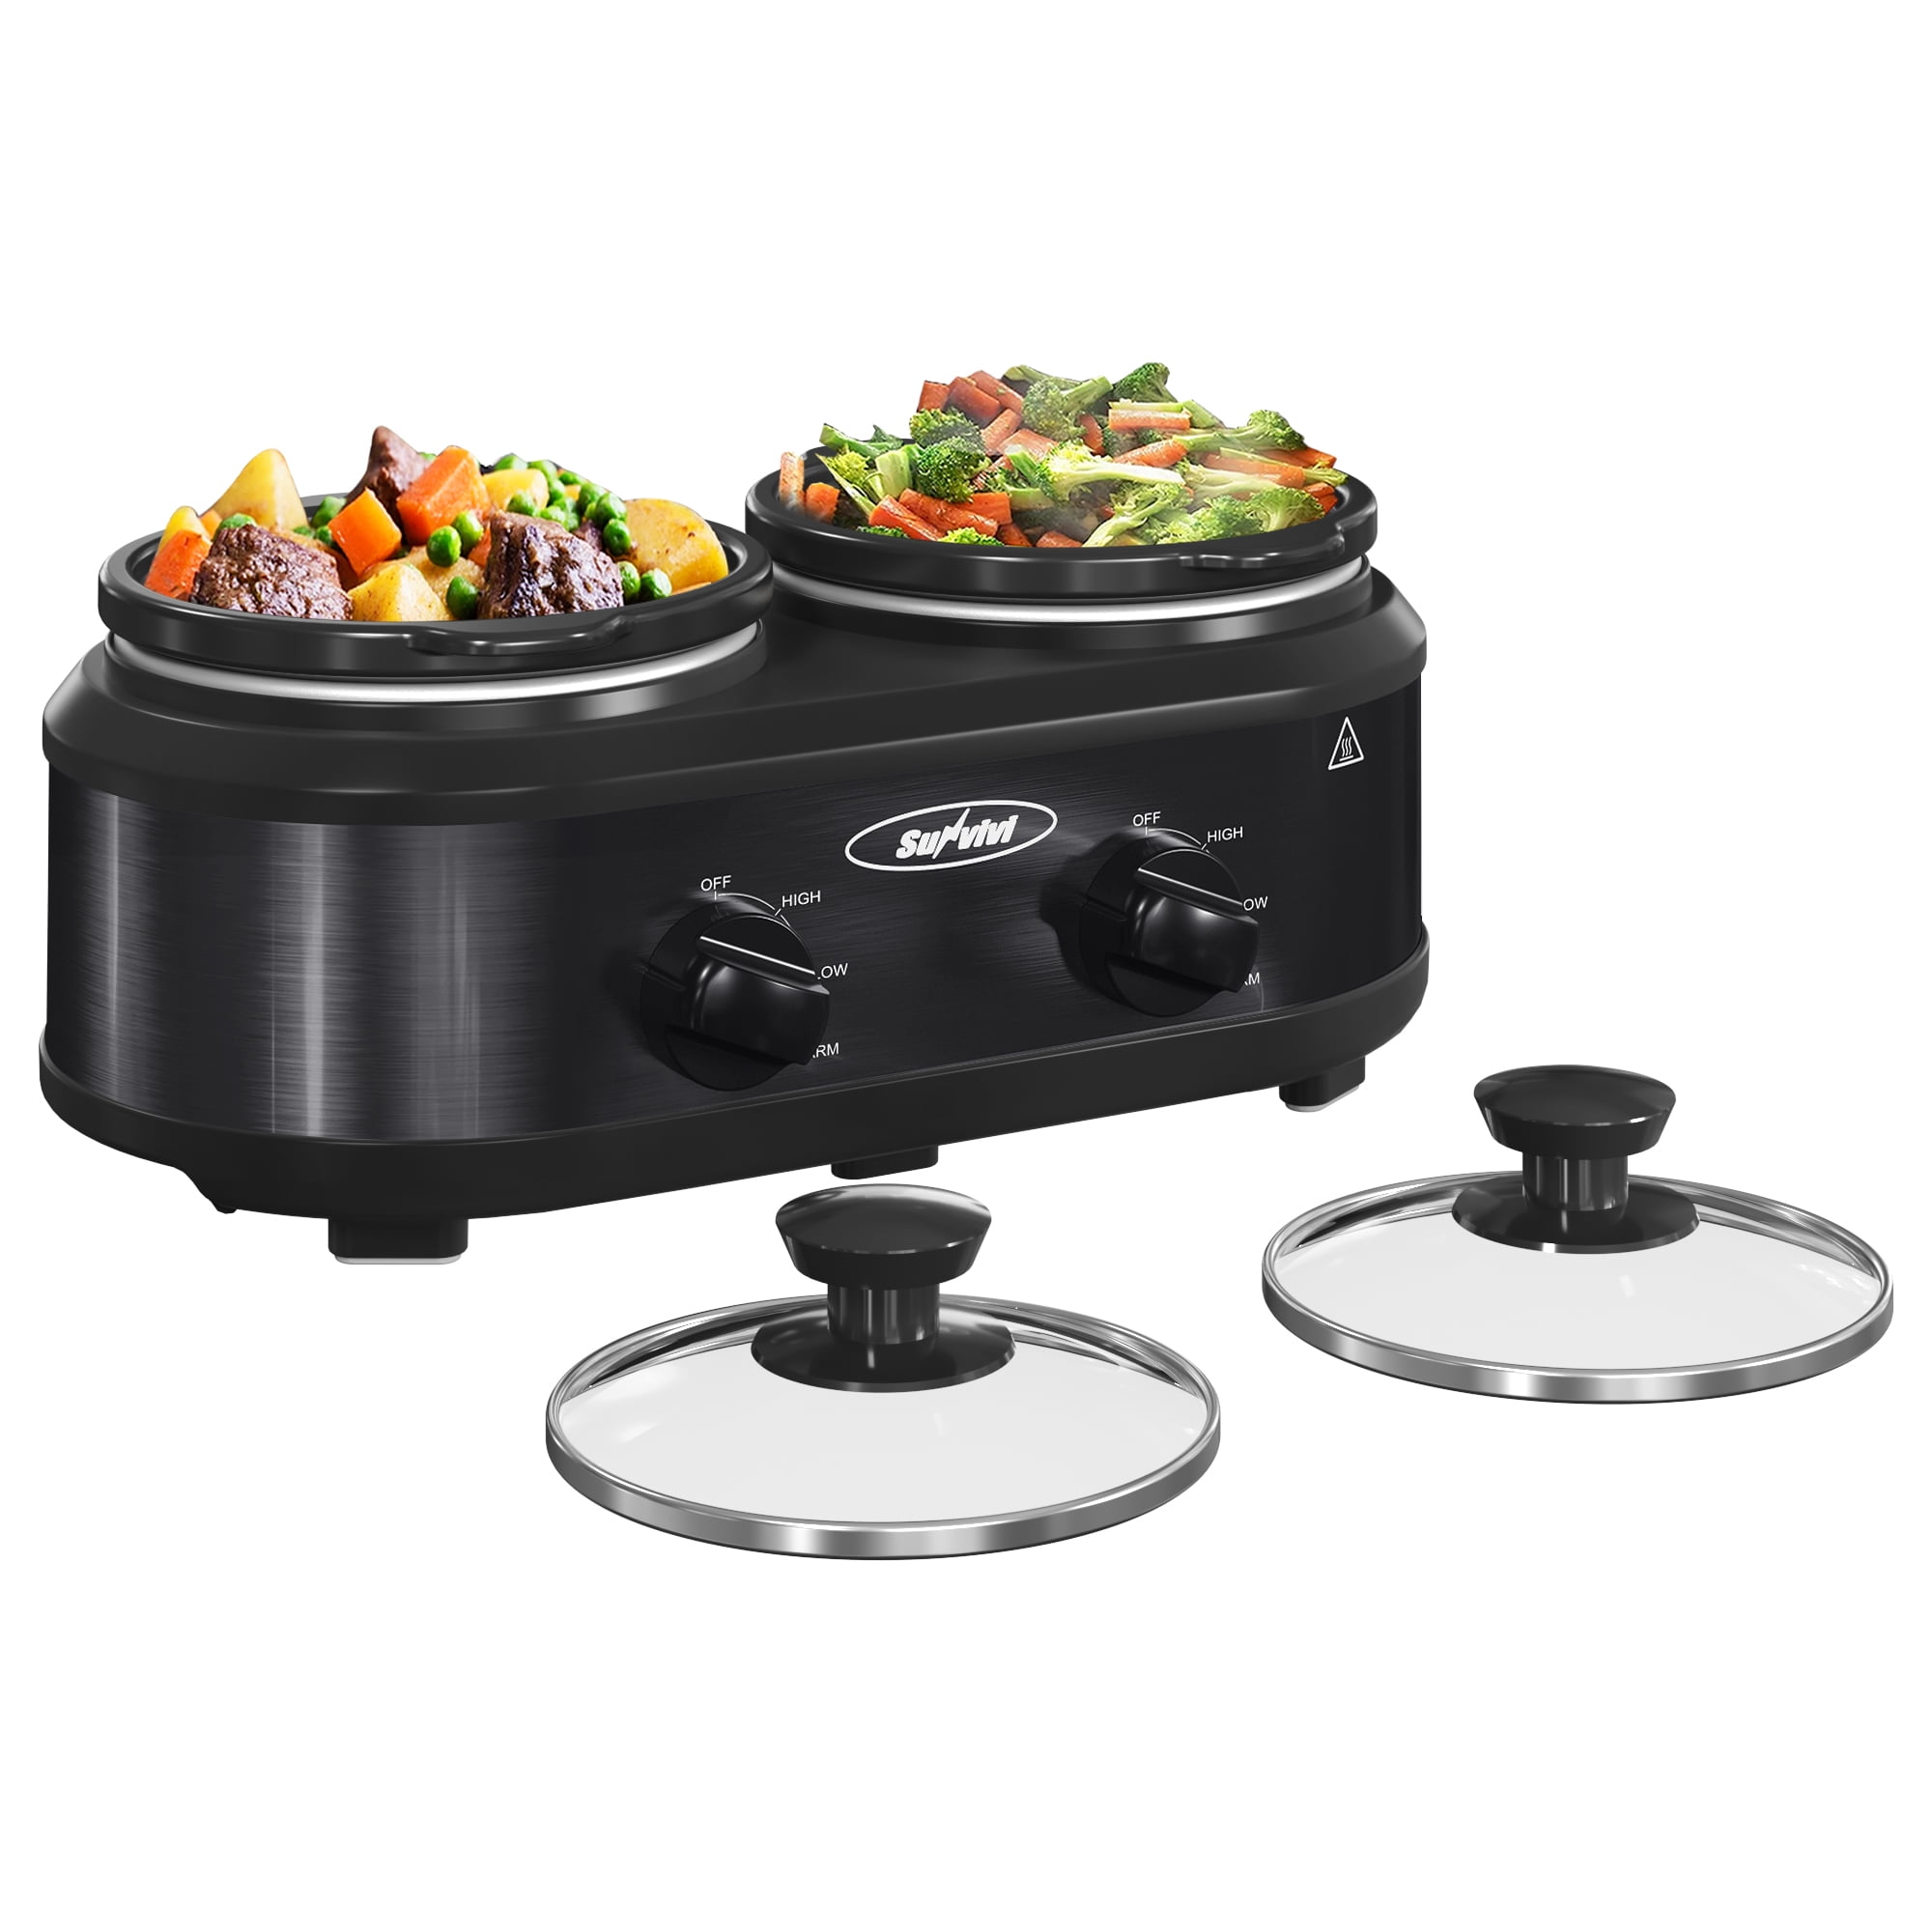 New Crock pot Trio cook and serve for Sale in Robbinsdale, MN - OfferUp